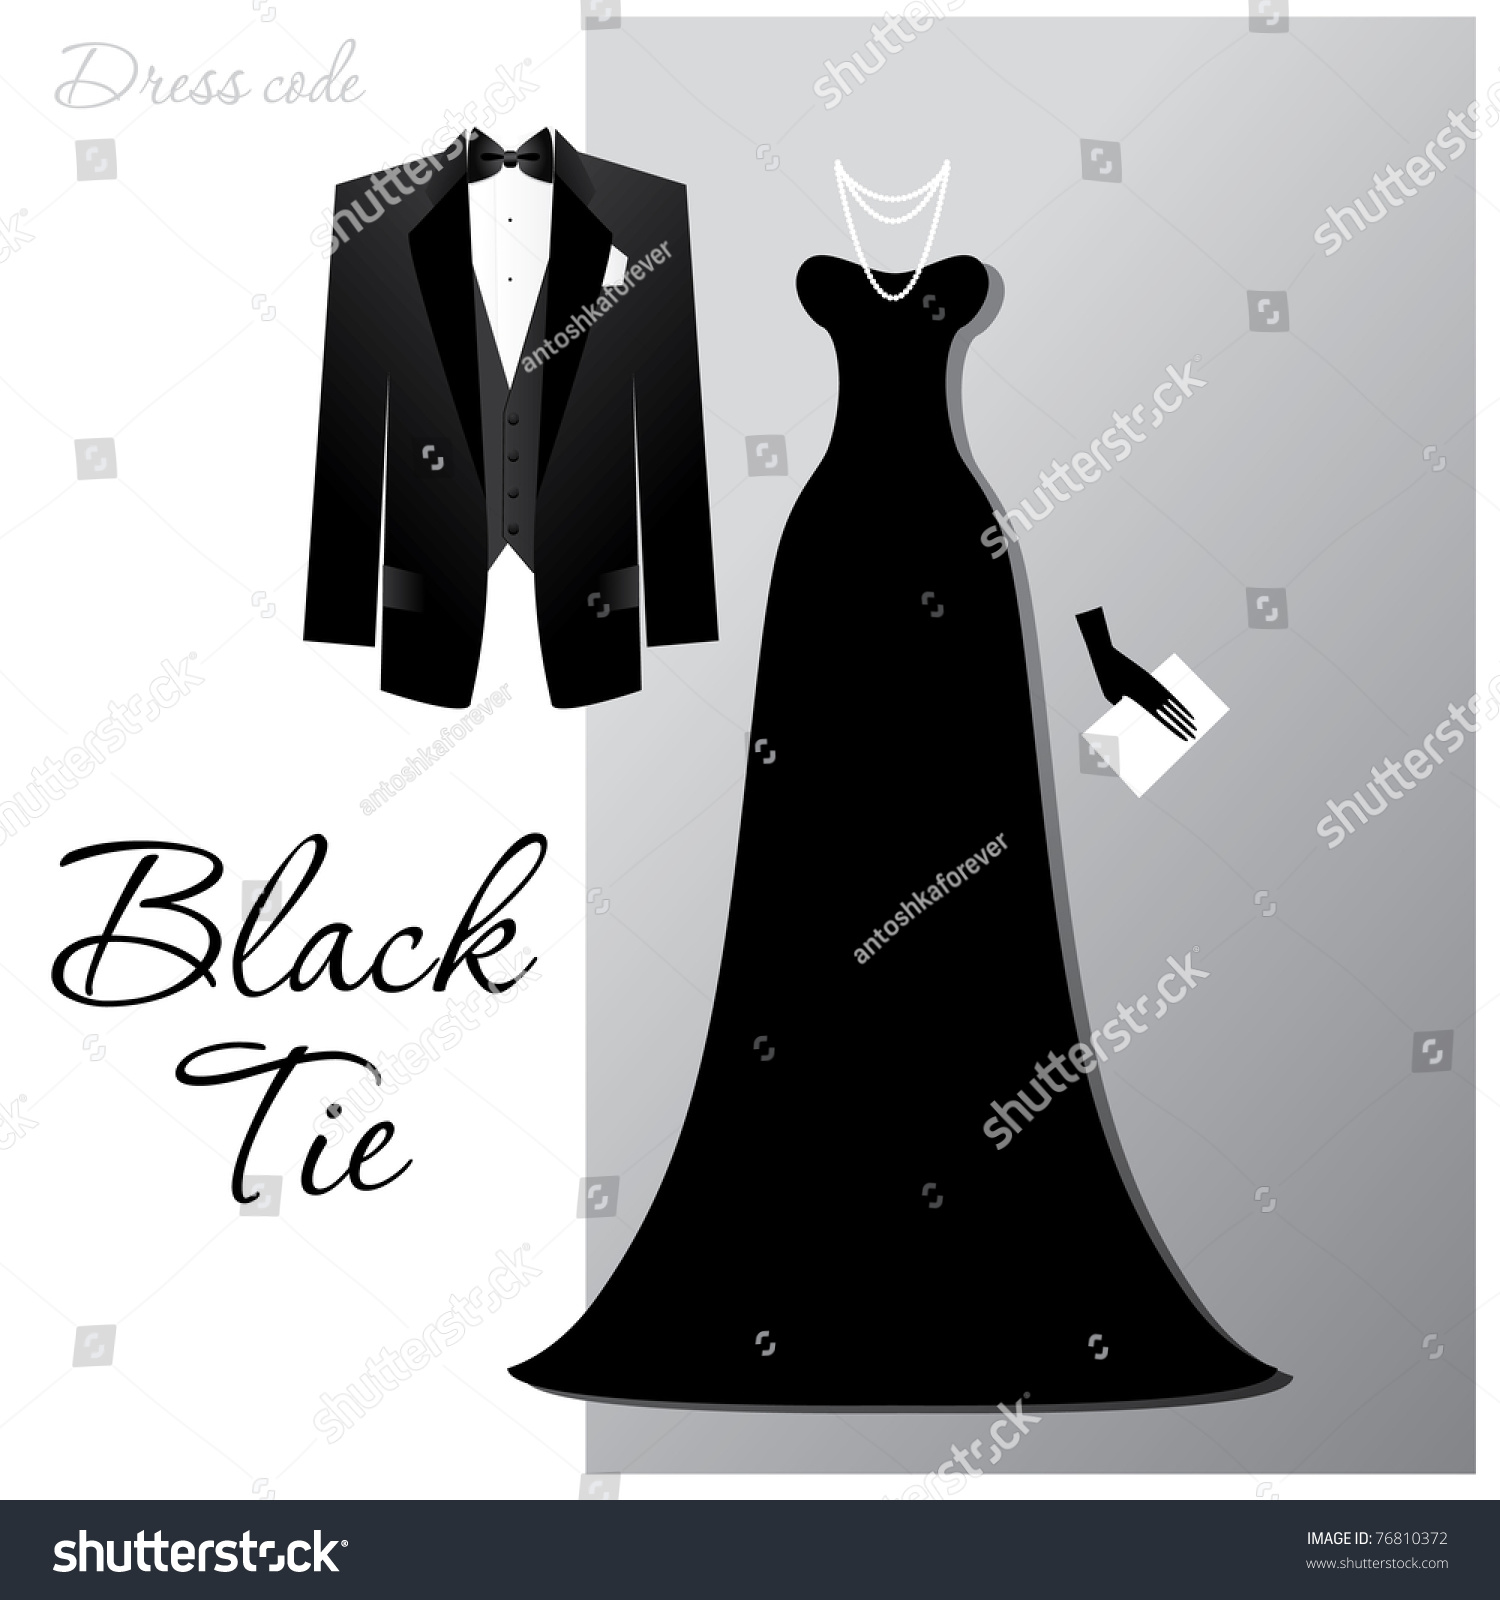 black tie and gown dress code